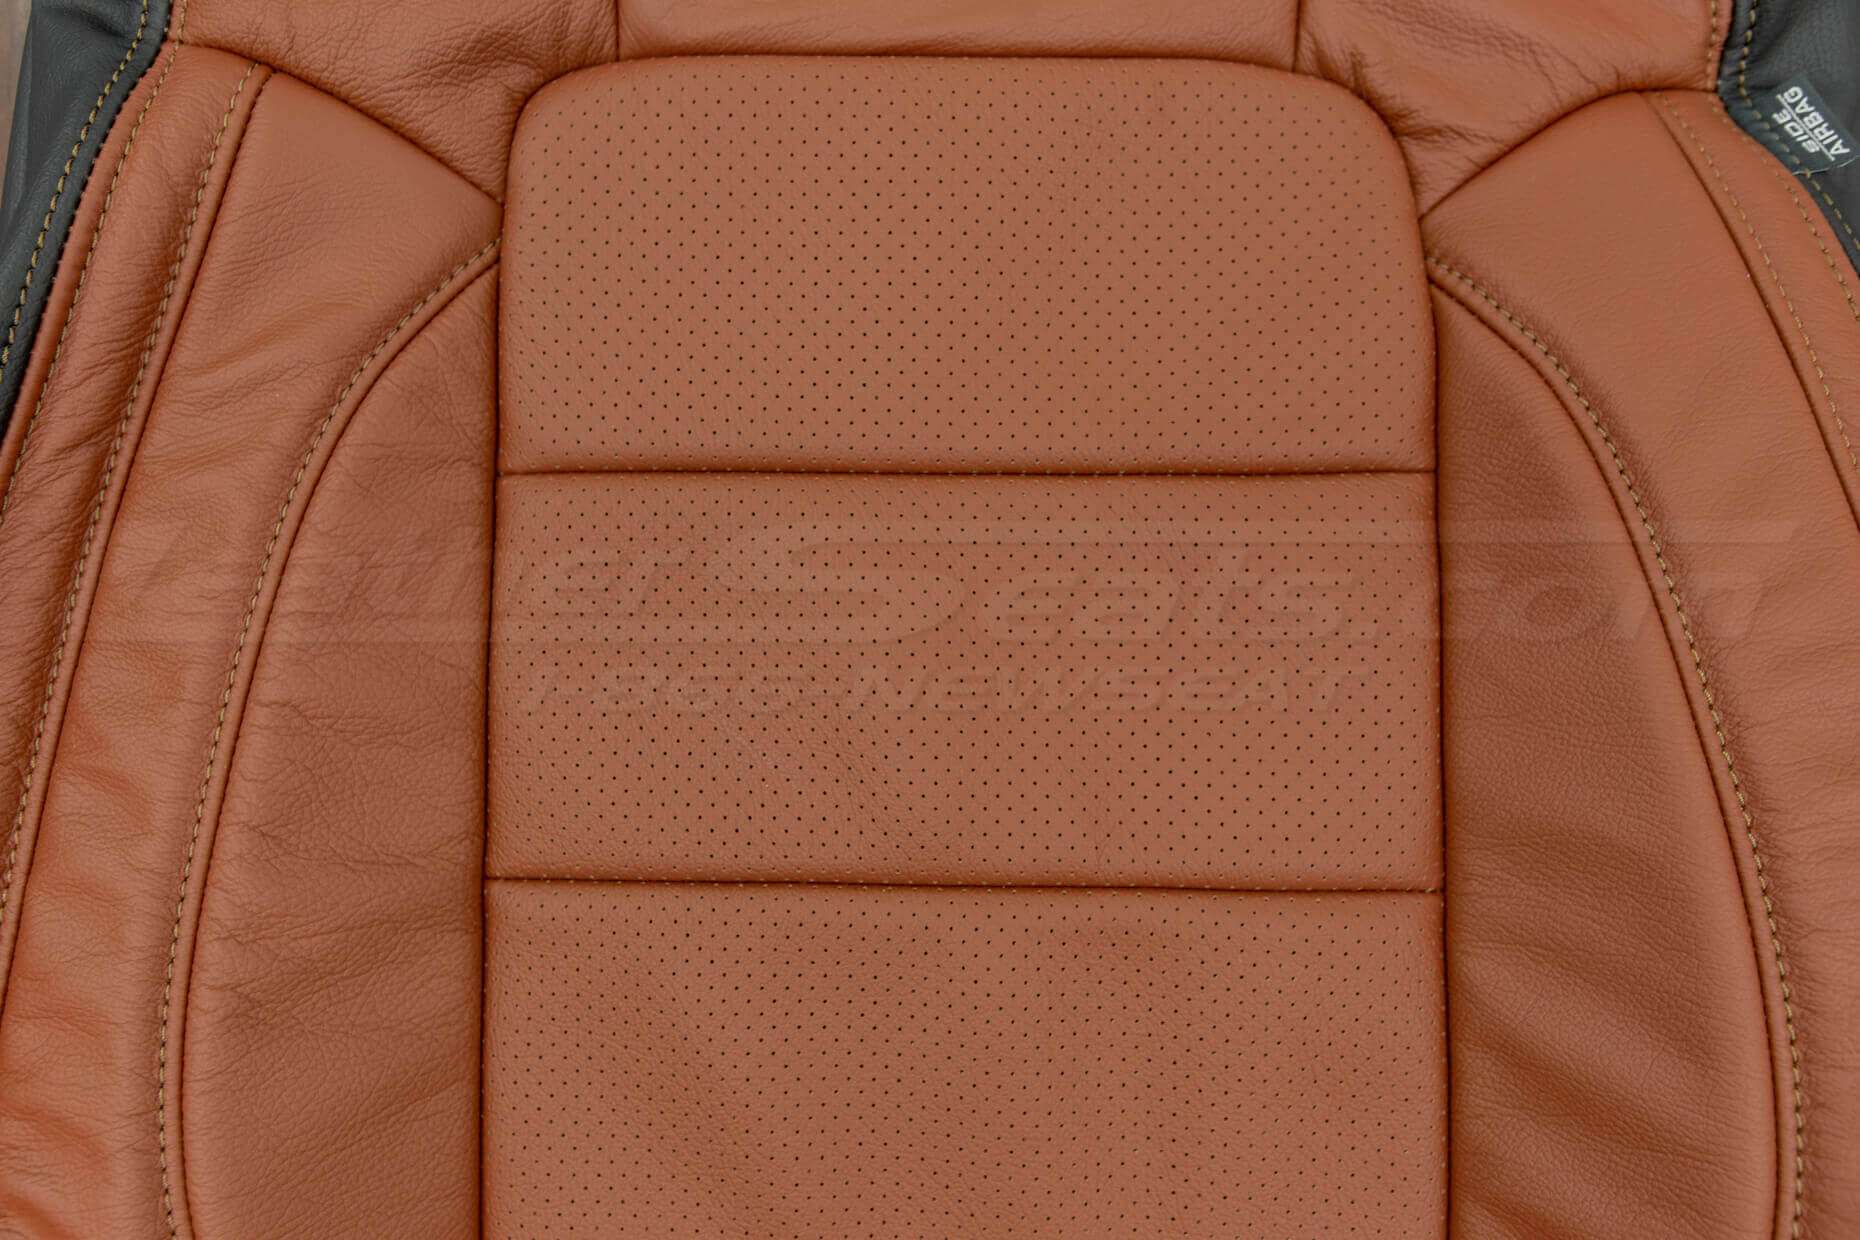 Ford Mustang upholstery kit -Mitt Brown - Front backrest perforated insert